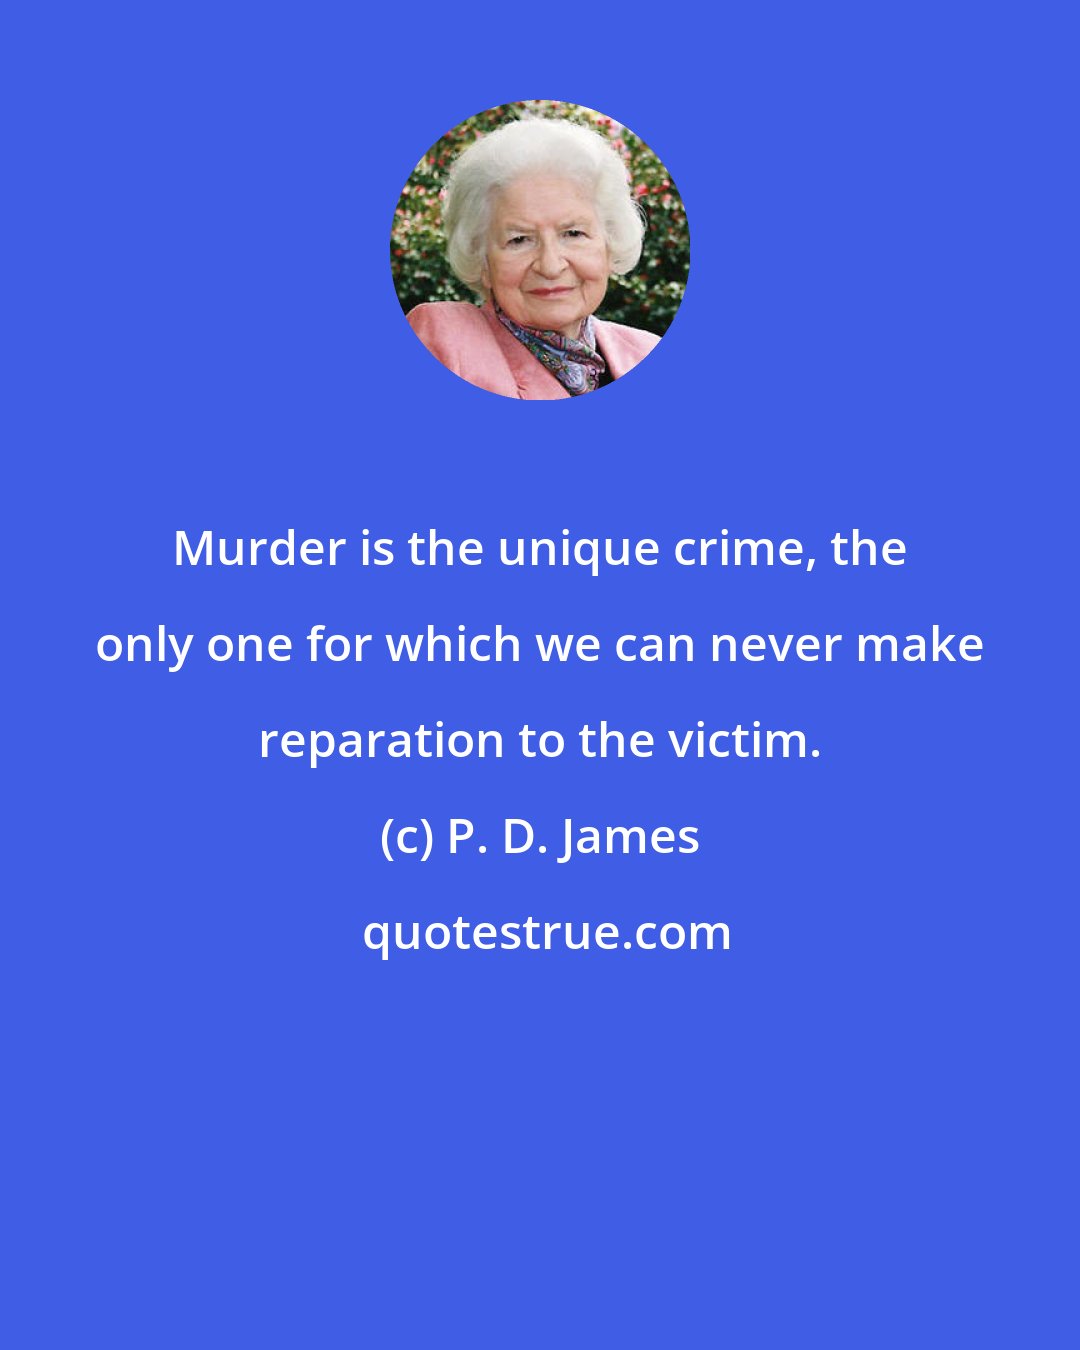 P. D. James: Murder is the unique crime, the only one for which we can never make reparation to the victim.